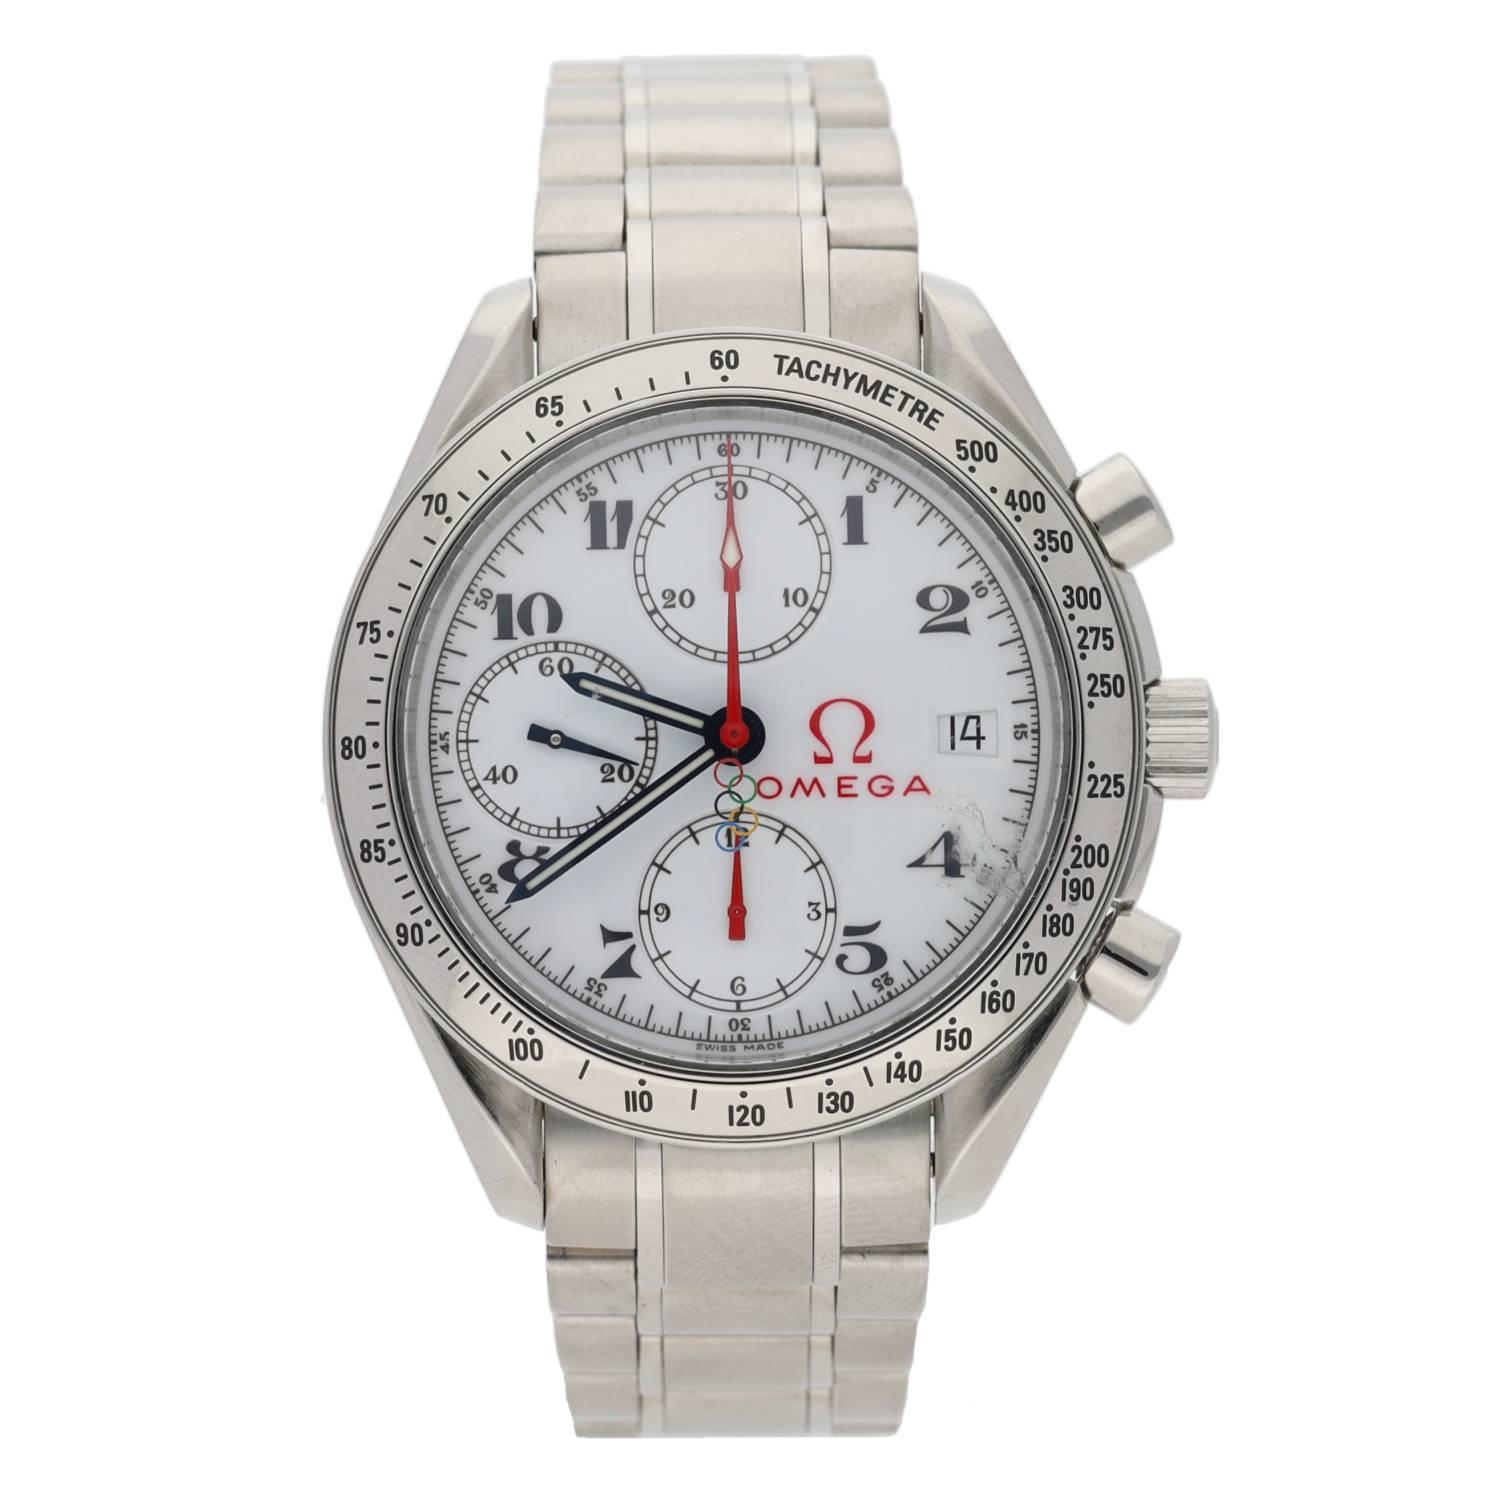 Omega Speedmaster Olympic Edition Chronograph automatic stainless steel gentleman's wristwatch, - Image 2 of 5